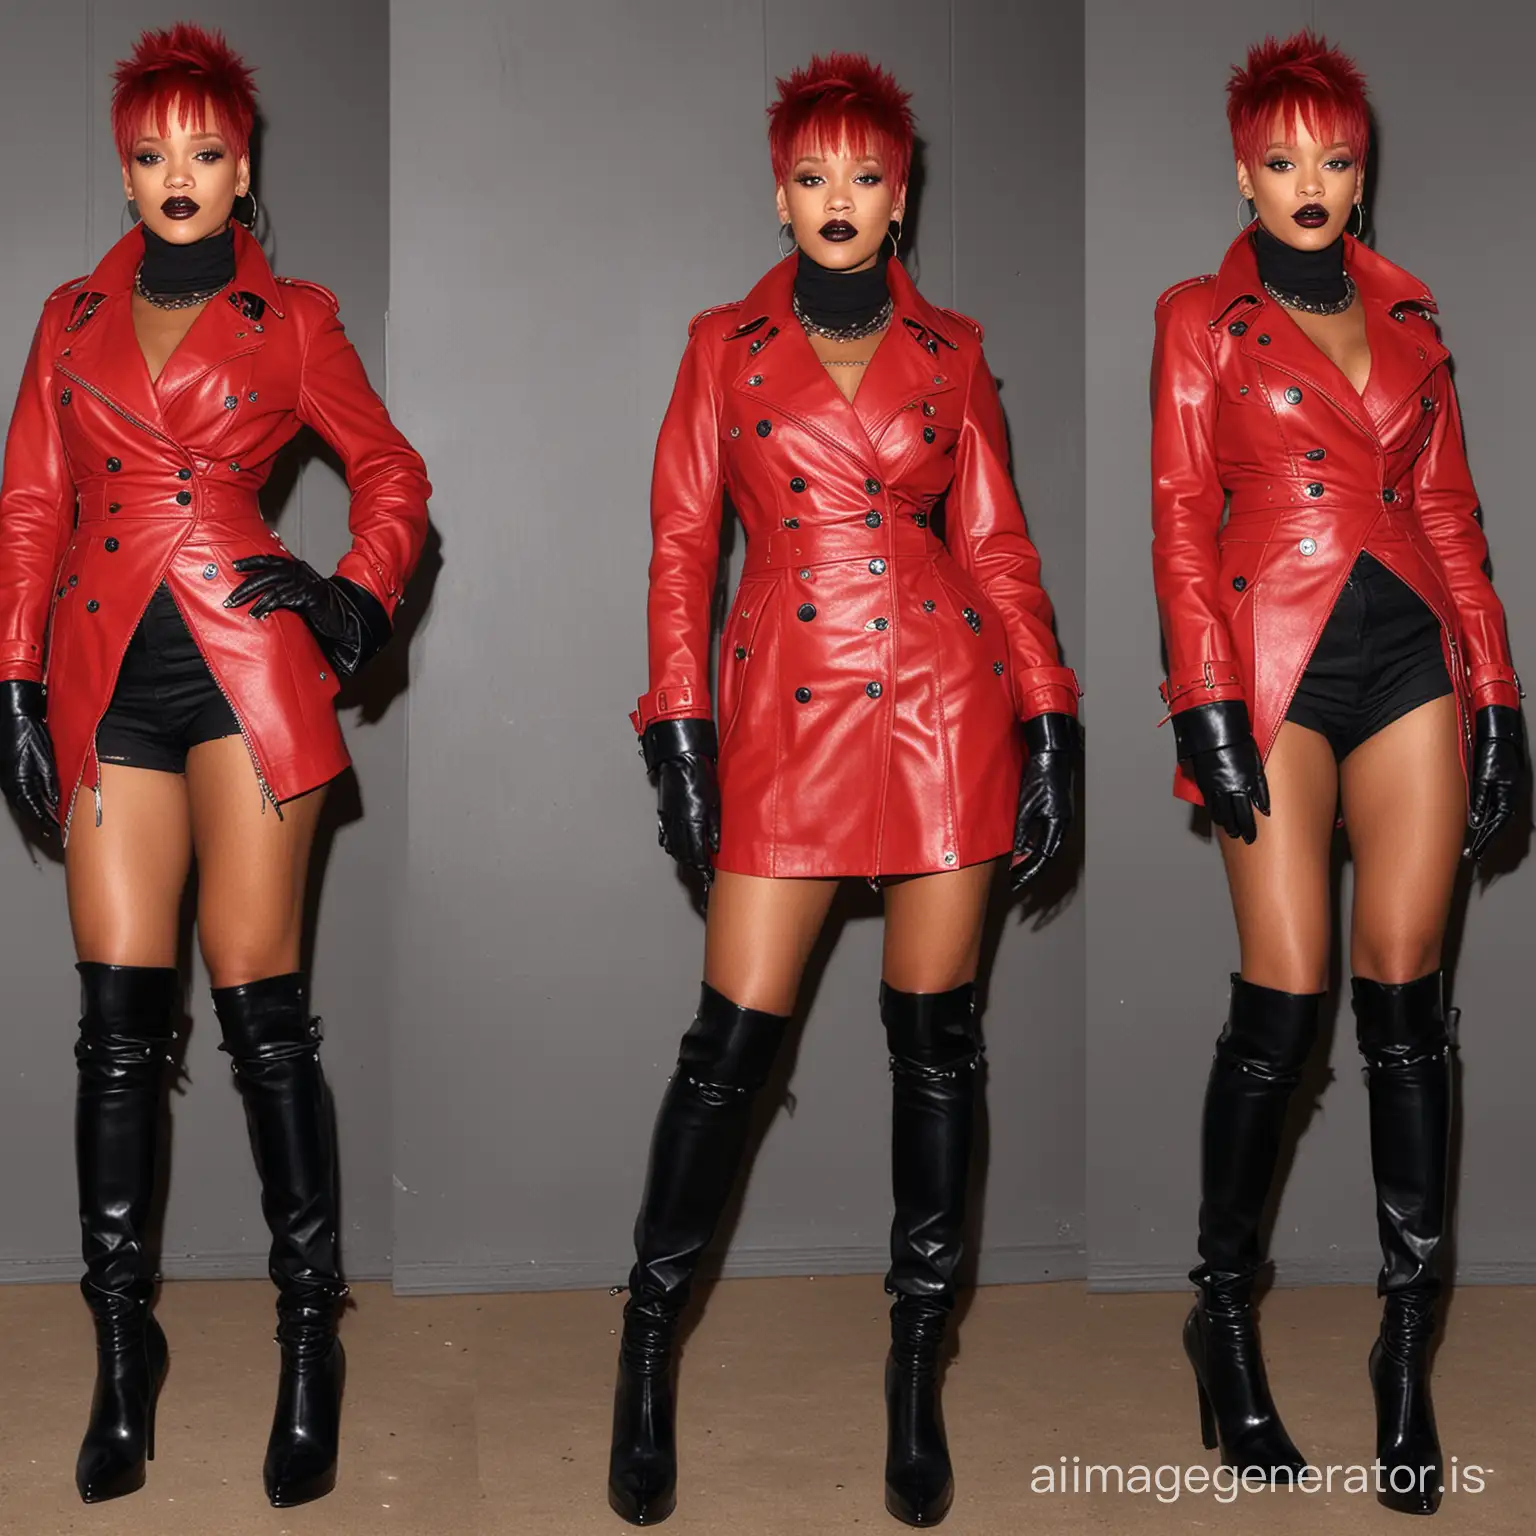 Rihanna, , large breasts, wearing red leather trench coat,punk rock red spike hair, black leather gloves, , spiked collar, high heel leather boots, leather bra, black lipstick,